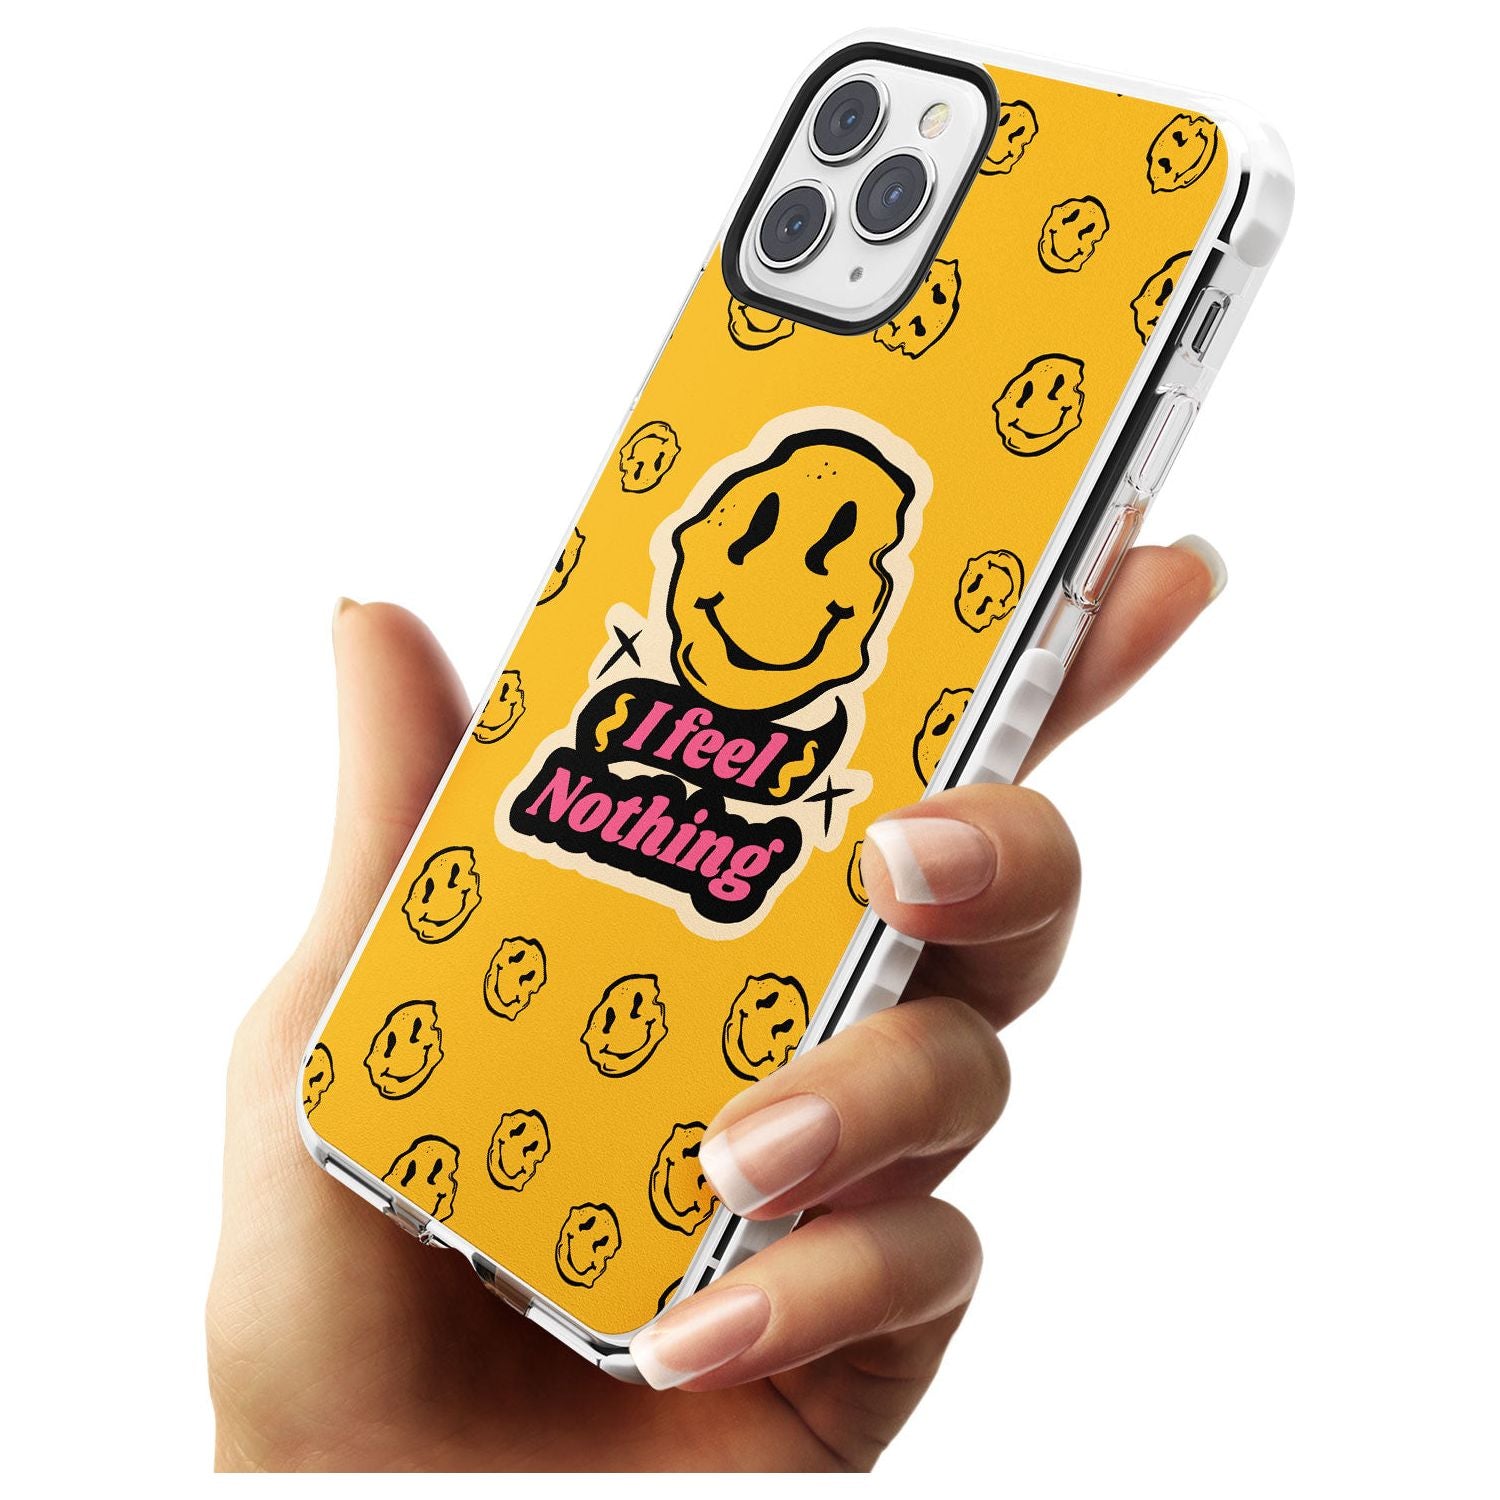 I feel nothing Impact Phone Case for iPhone 11 Pro Max